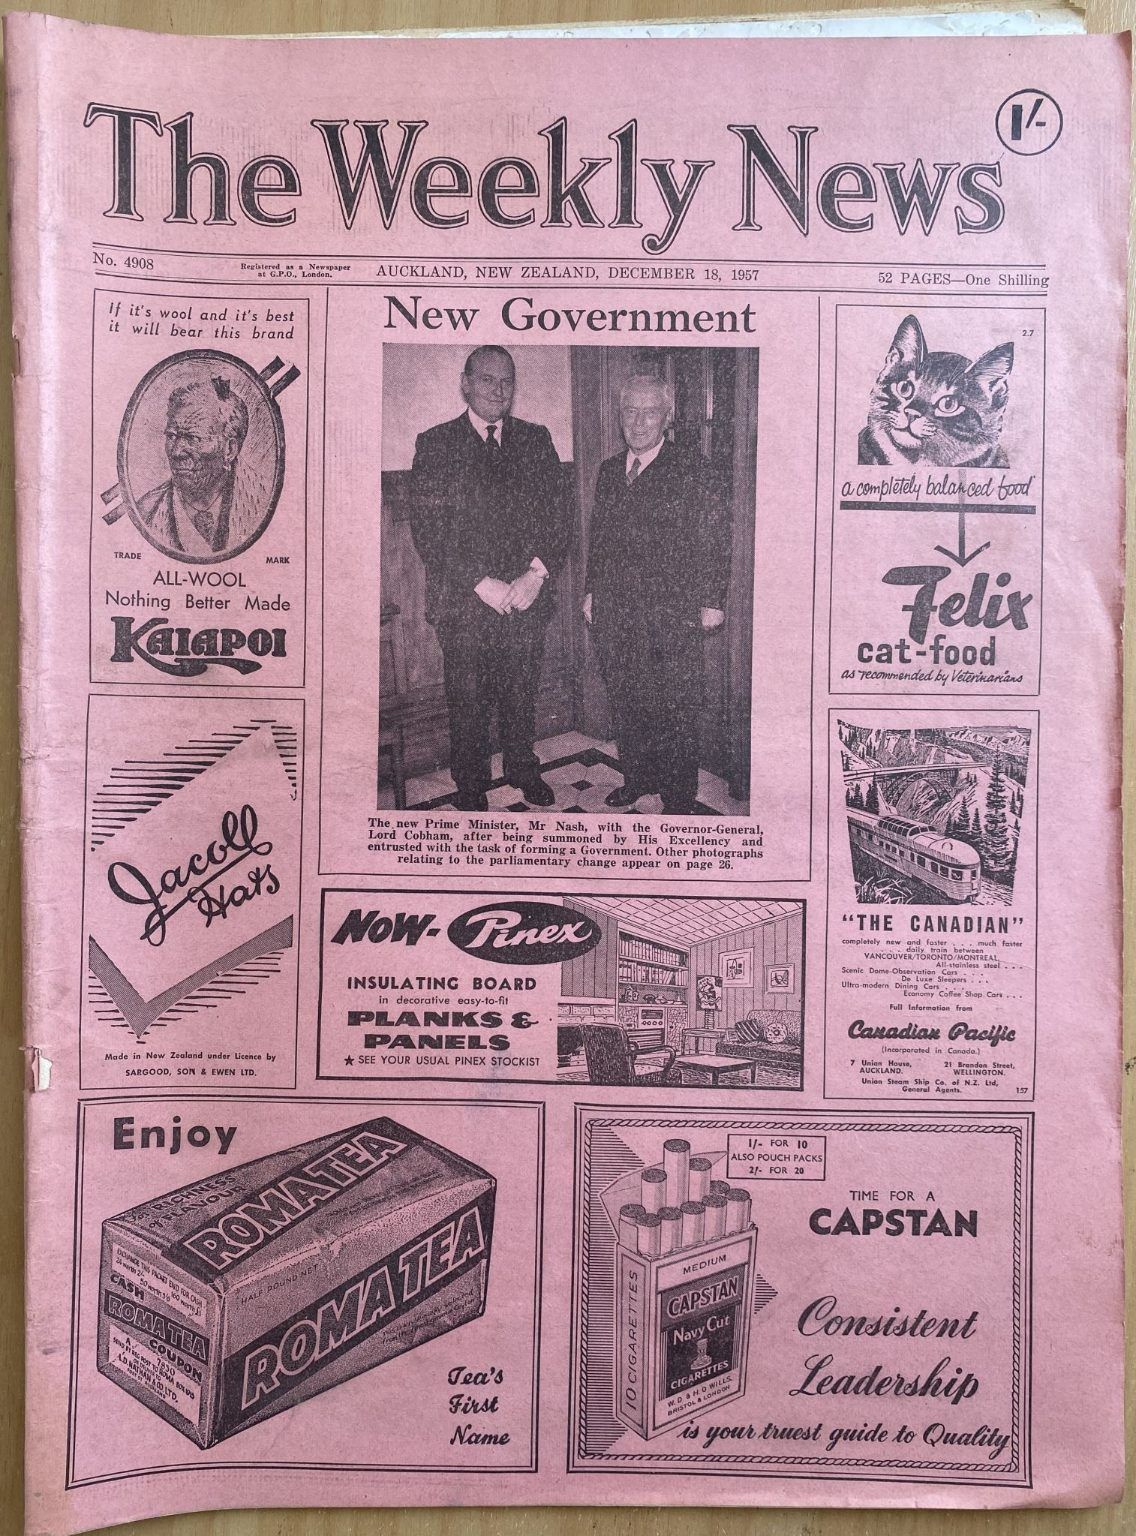 OLD NEWSPAPER: The Weekly News, No. 4908, 18 December 1957